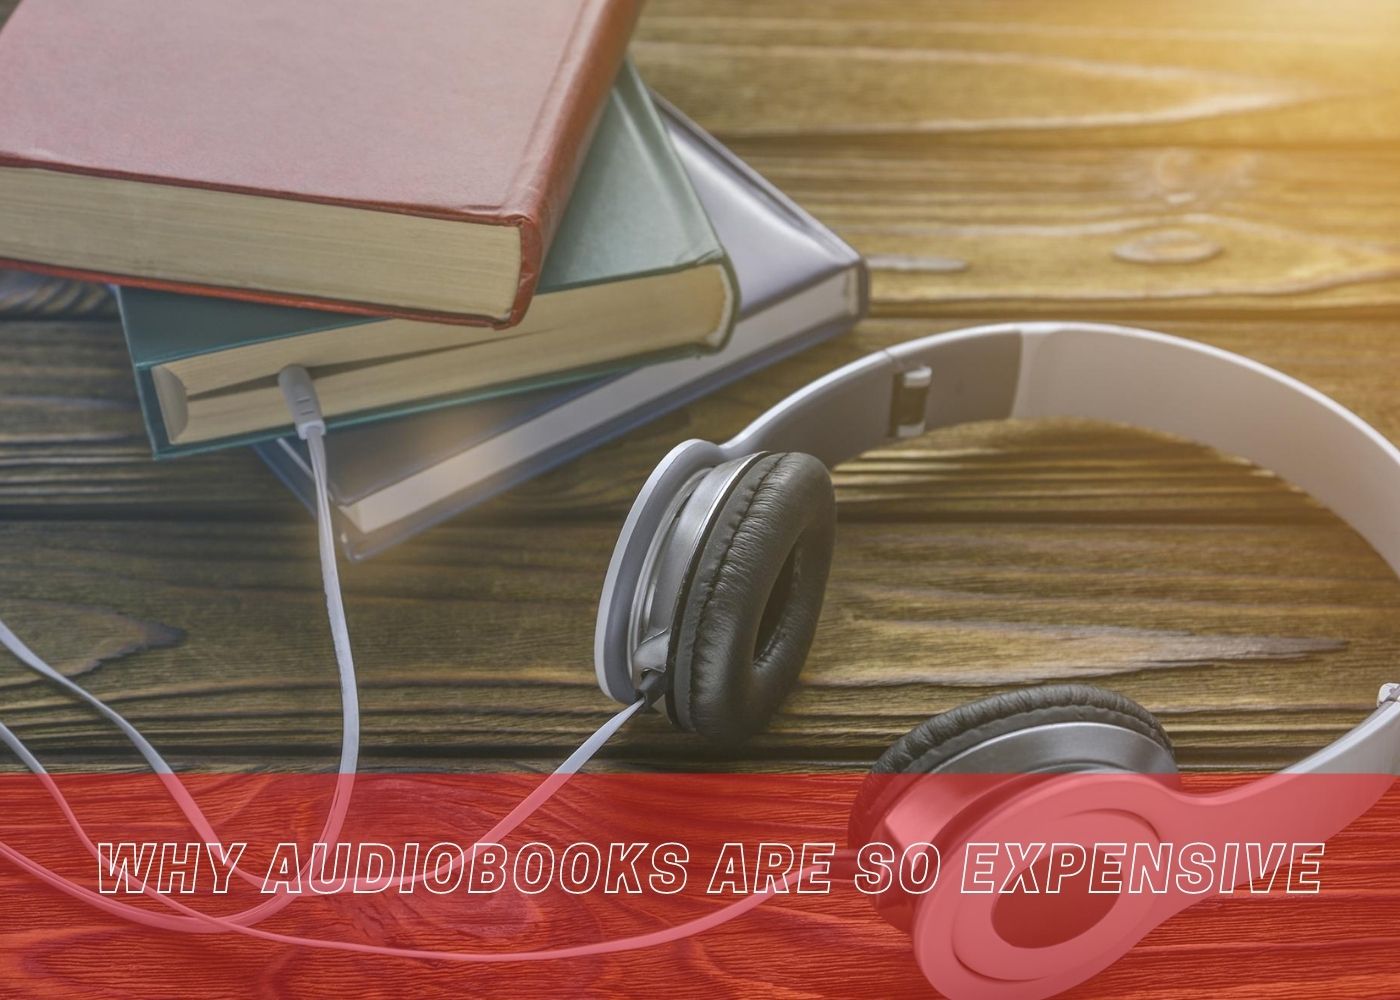 Why Audiobooks are so expensive 